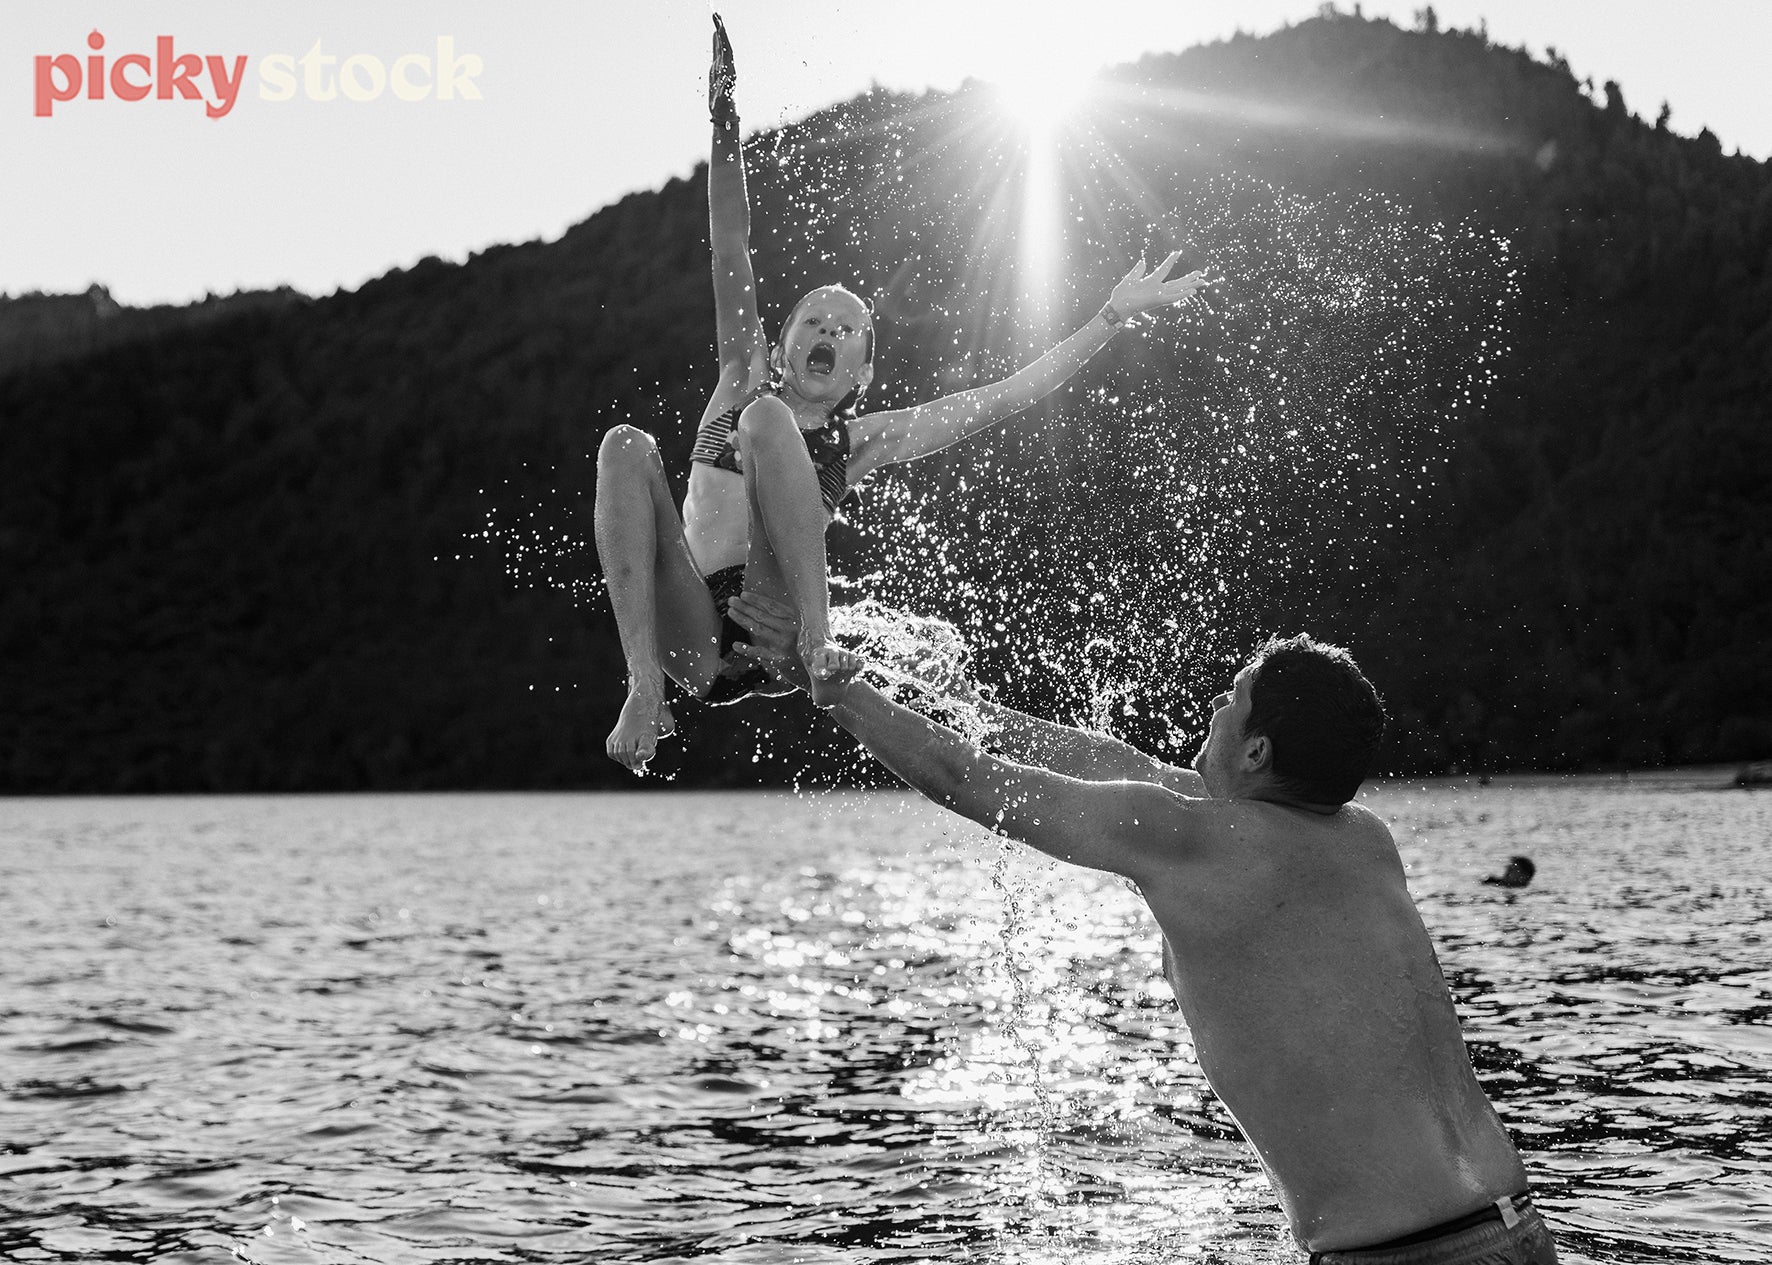 Father, man throws daughter girl wearing bikini togs swimwear out of the water. Girl has a big shocked expression on her face. Water is flying in the sky, with sunlight directly hitting her and the water in the middle of frame. They are playing in water in Blue Lake Rotorua, large mountain behind them. 